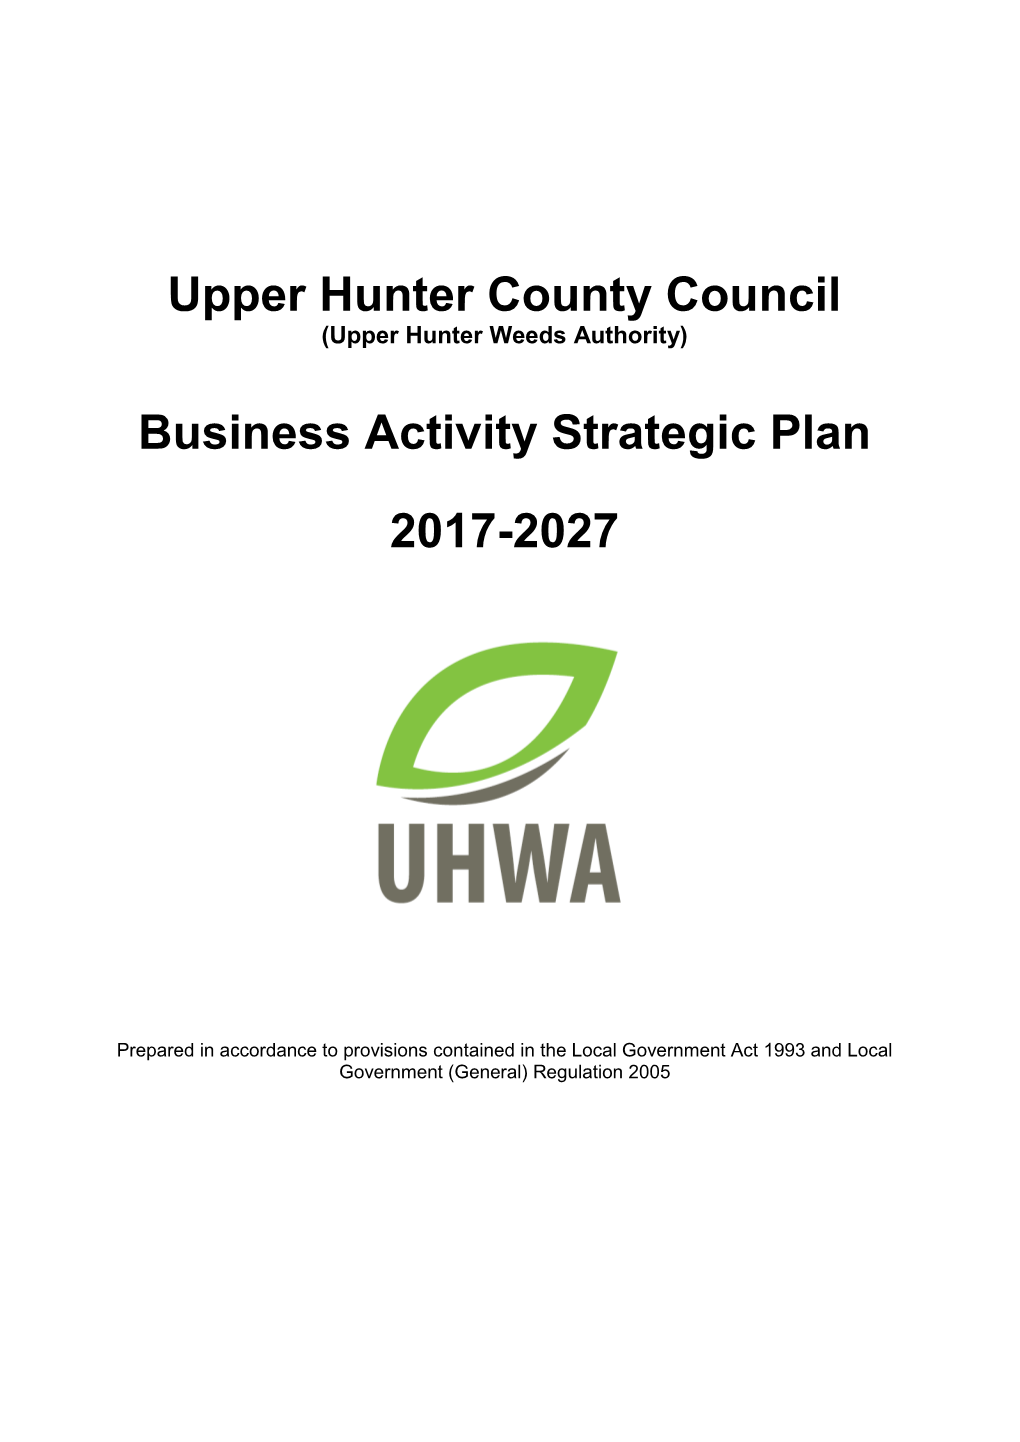 Upper Hunter County Council Business Activity Strategic Plan 2017-2027 Page 2